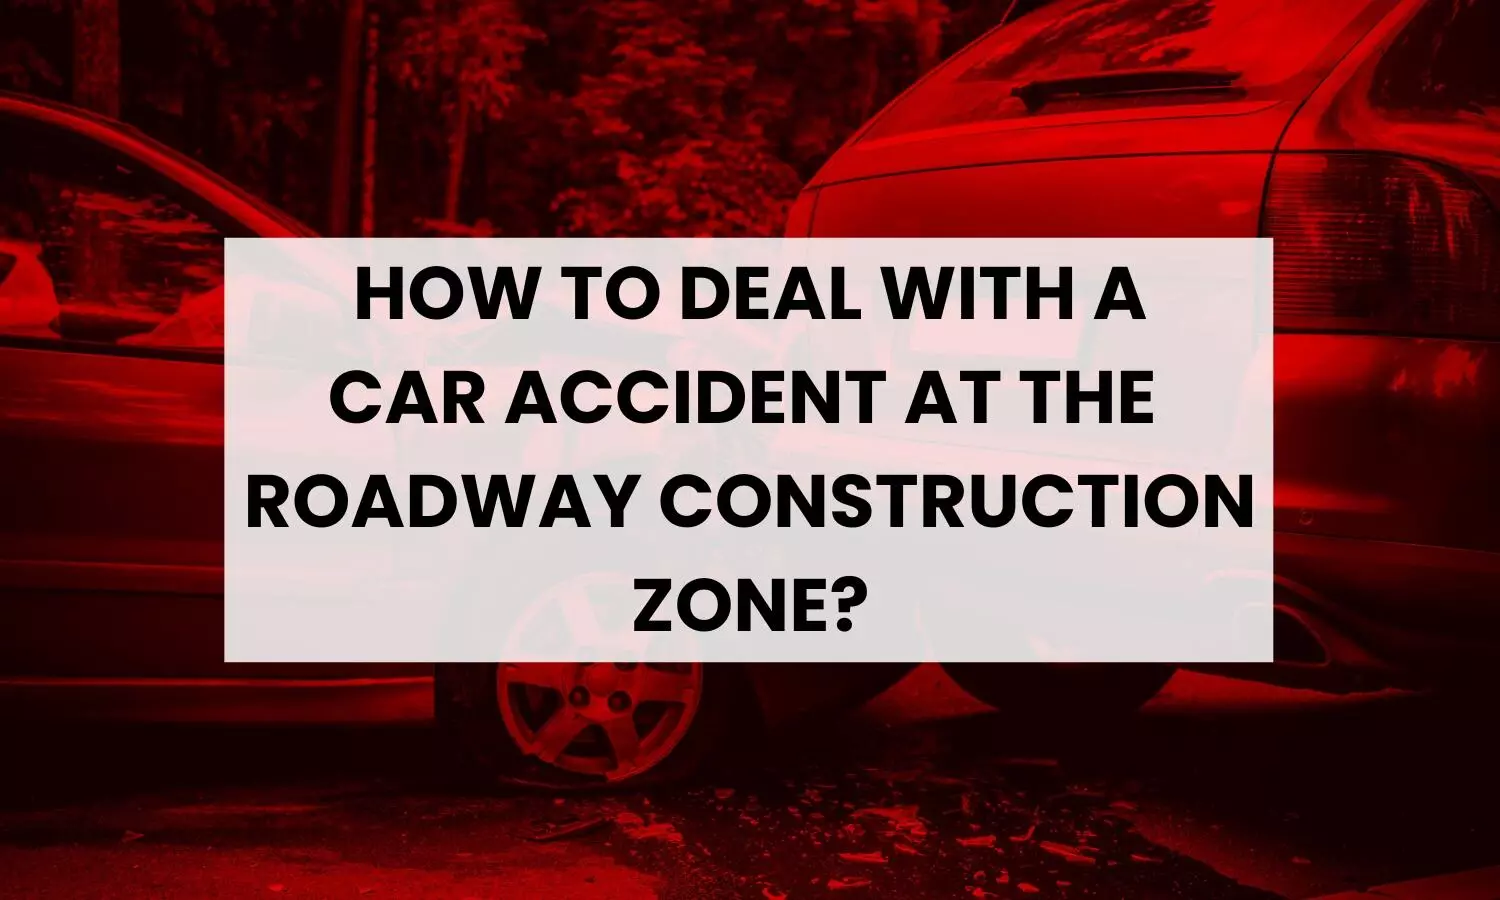 How To Deal With A Car Accident At The Roadway Construction Zone?